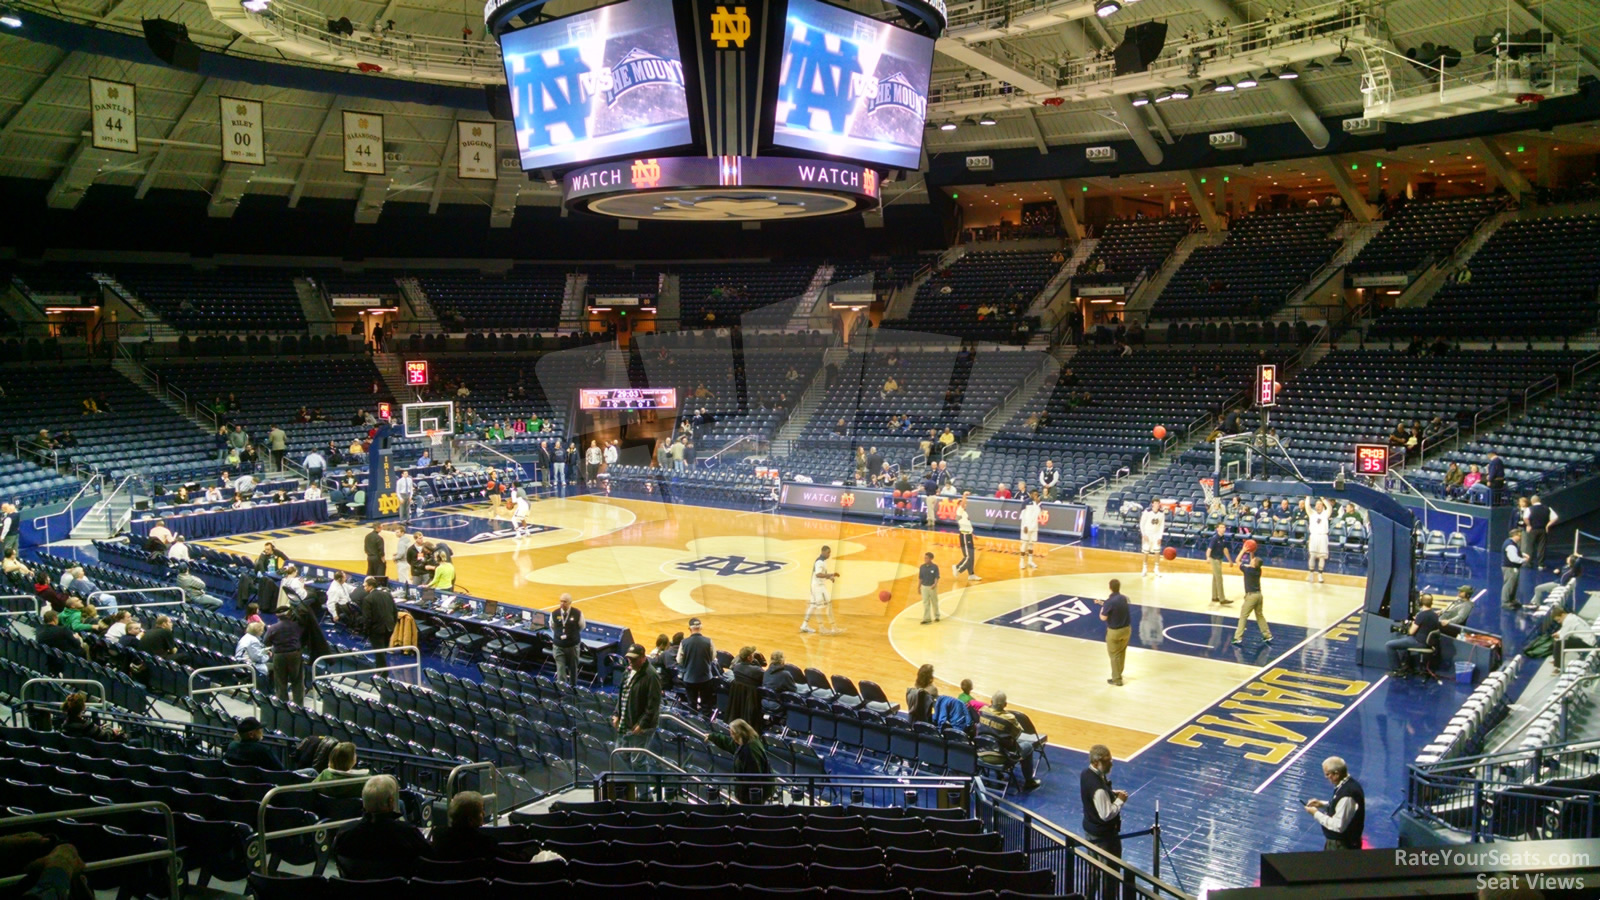 section 8, row 15 seat view  - joyce center